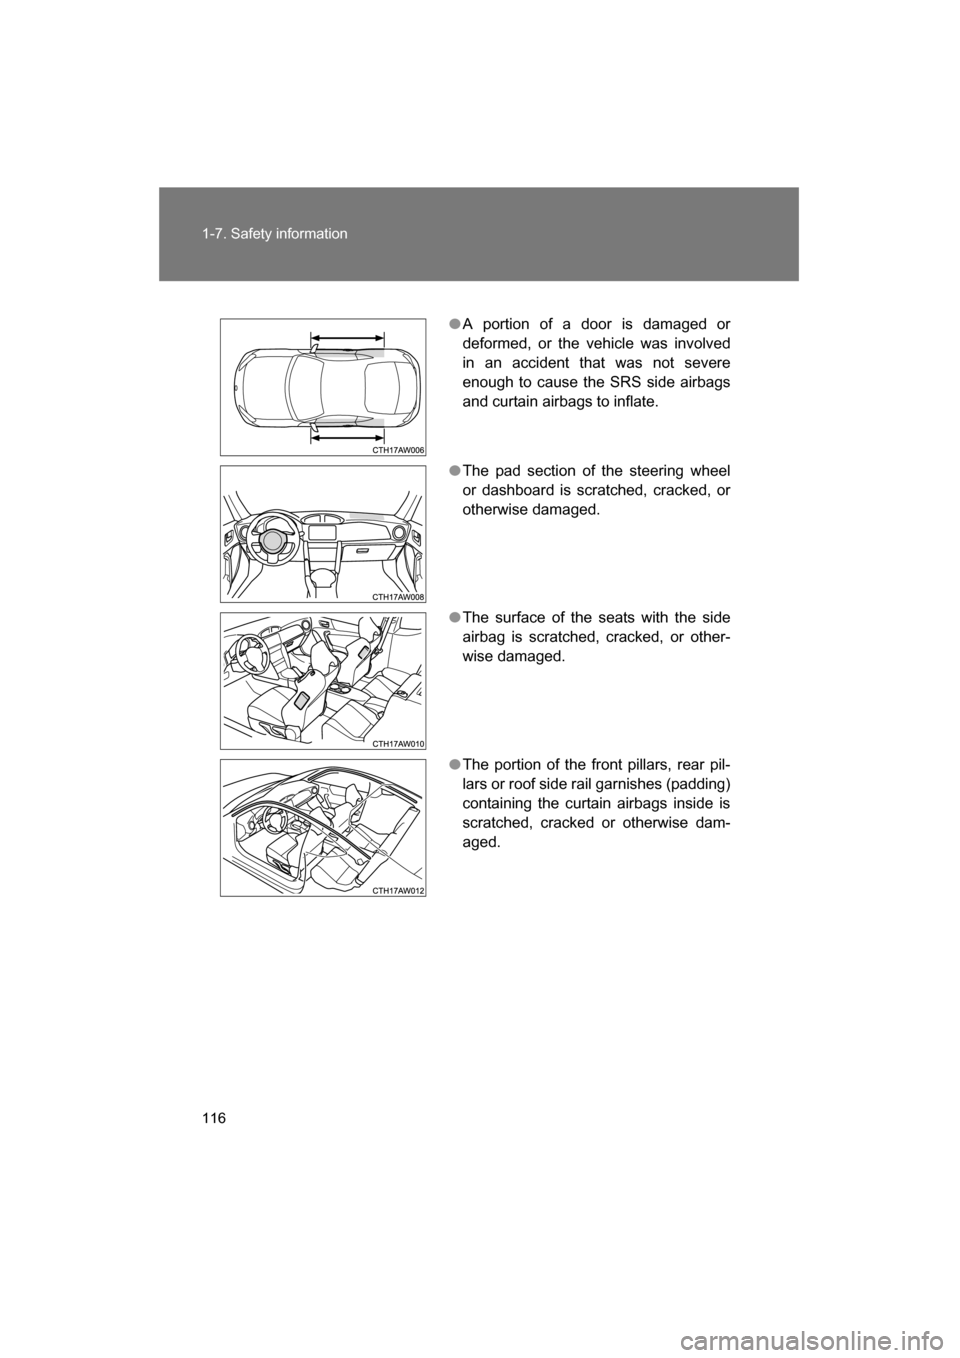 SUBARU BRZ 2015 1.G Owners Guide 116
1-7. Safety information
●A portion of a door is damaged or 
deformed, or the vehicle was involved
in an accident that was not severe
enough to cause the SRS side airbags
and curtain airbags to i